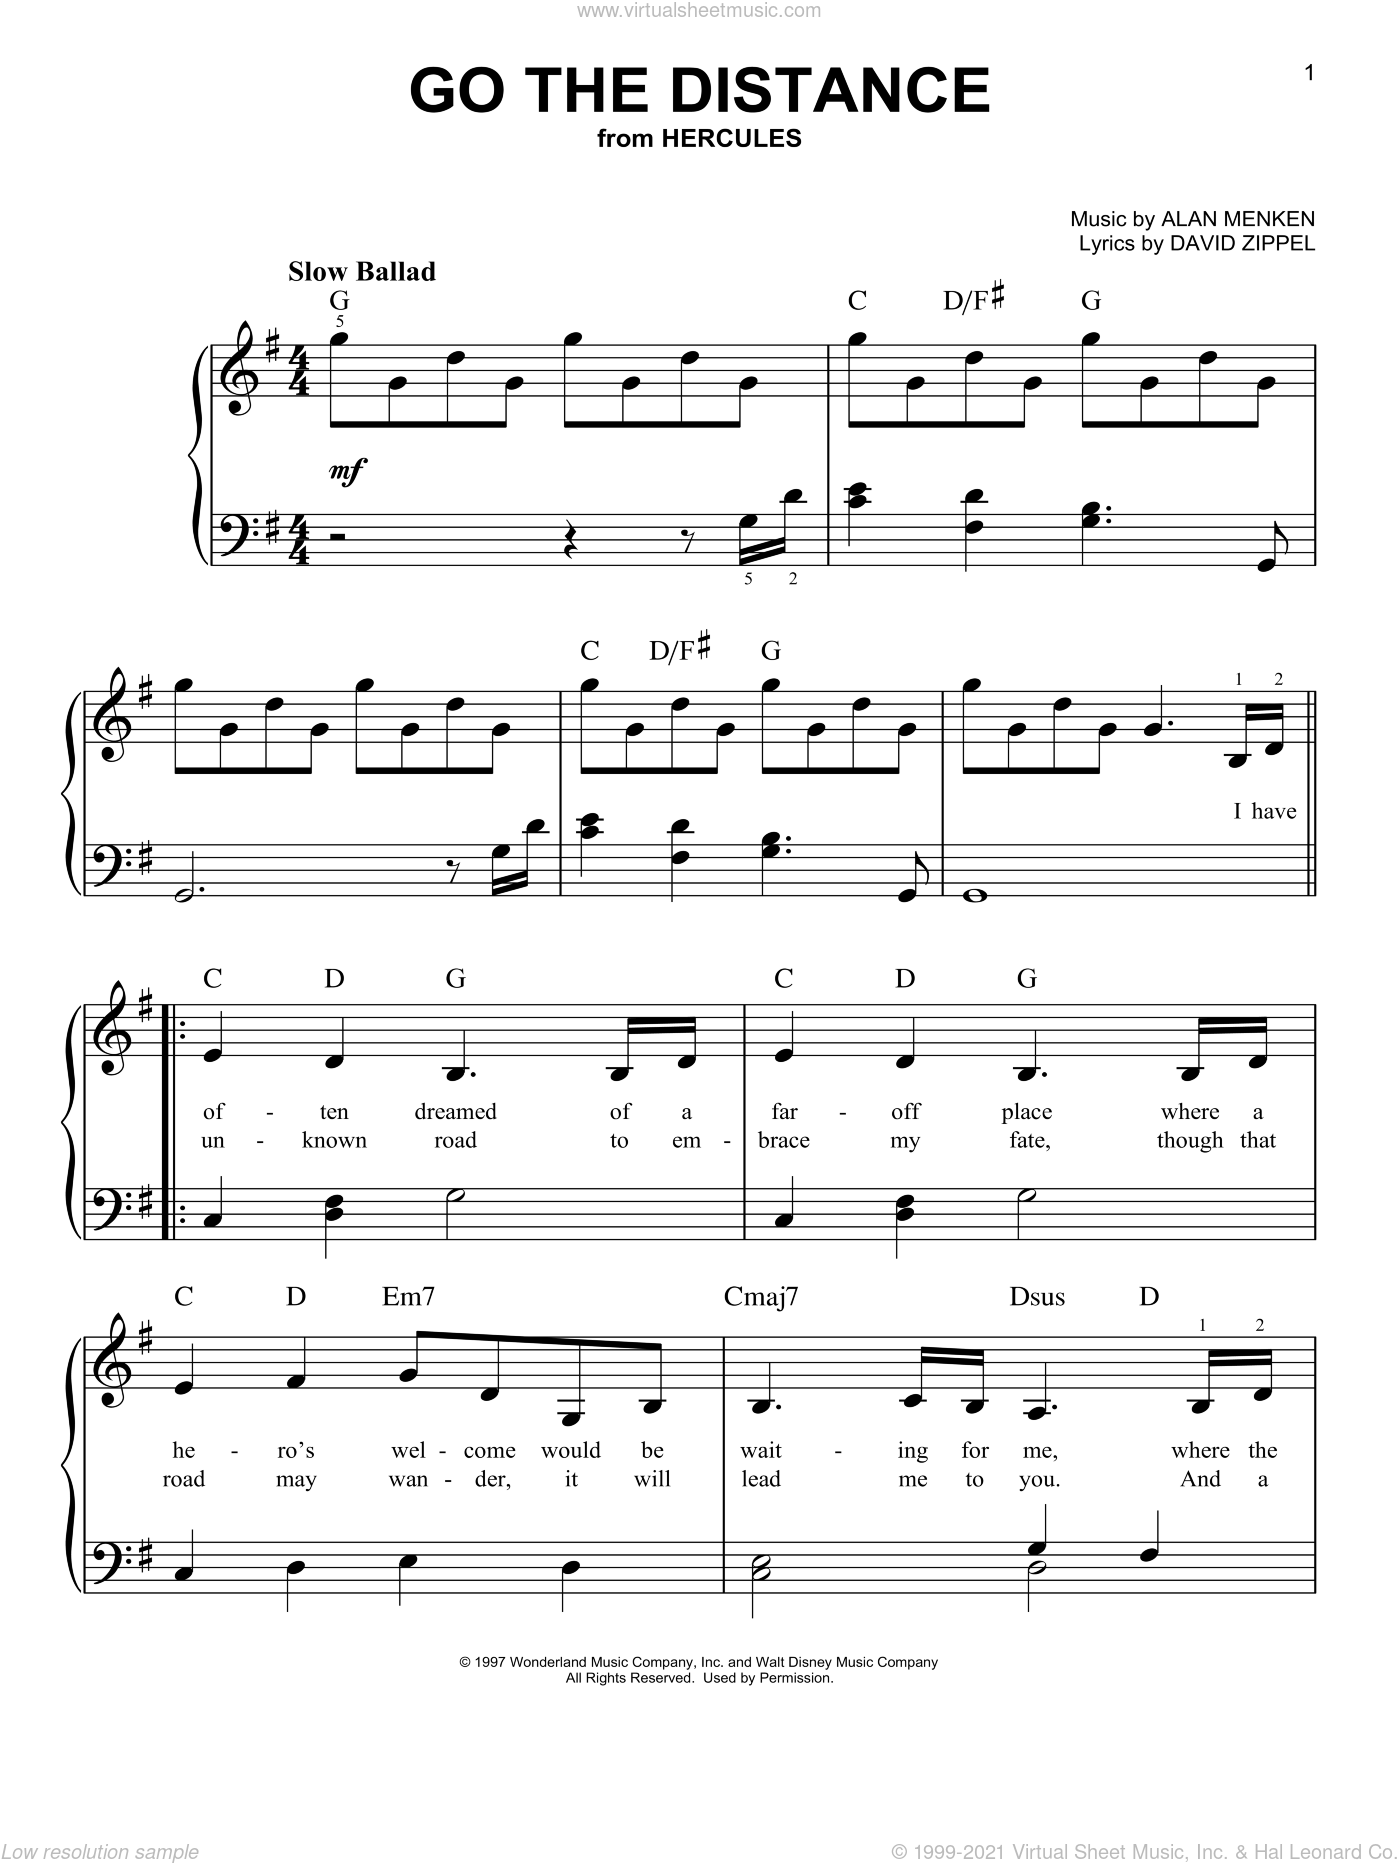 Bolton - Go The Distance, (easy) sheet music for piano ...